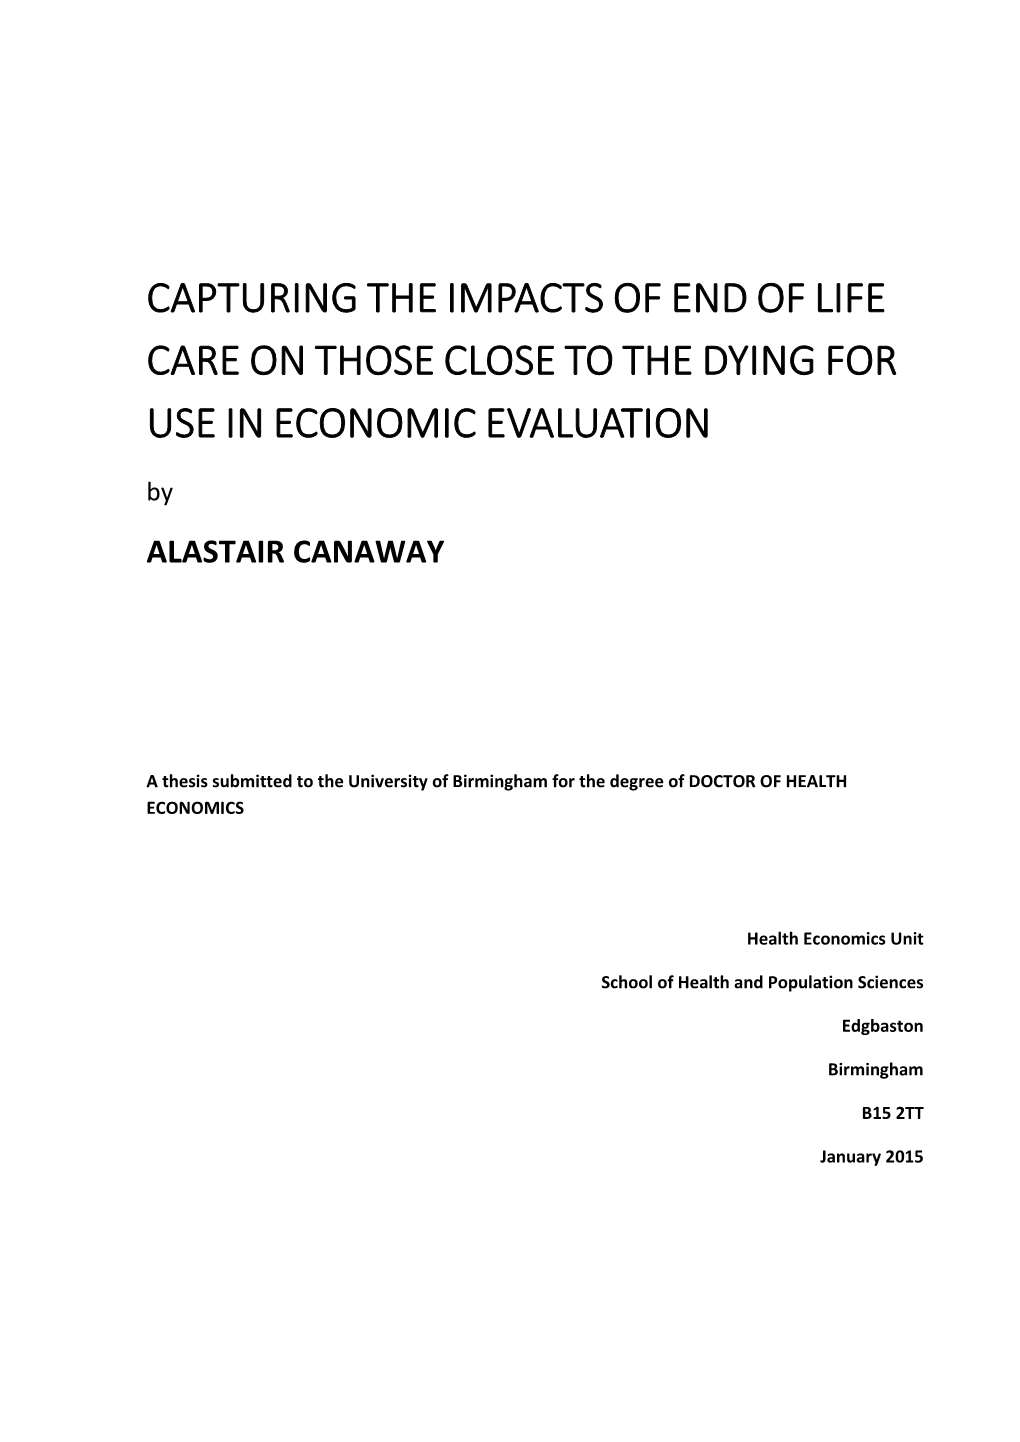 CAPTURING the IMPACTS of END of LIFE CARE on THOSE CLOSE to the DYING for USE in ECONOMIC EVALUATION by ALASTAIR CANAWAY